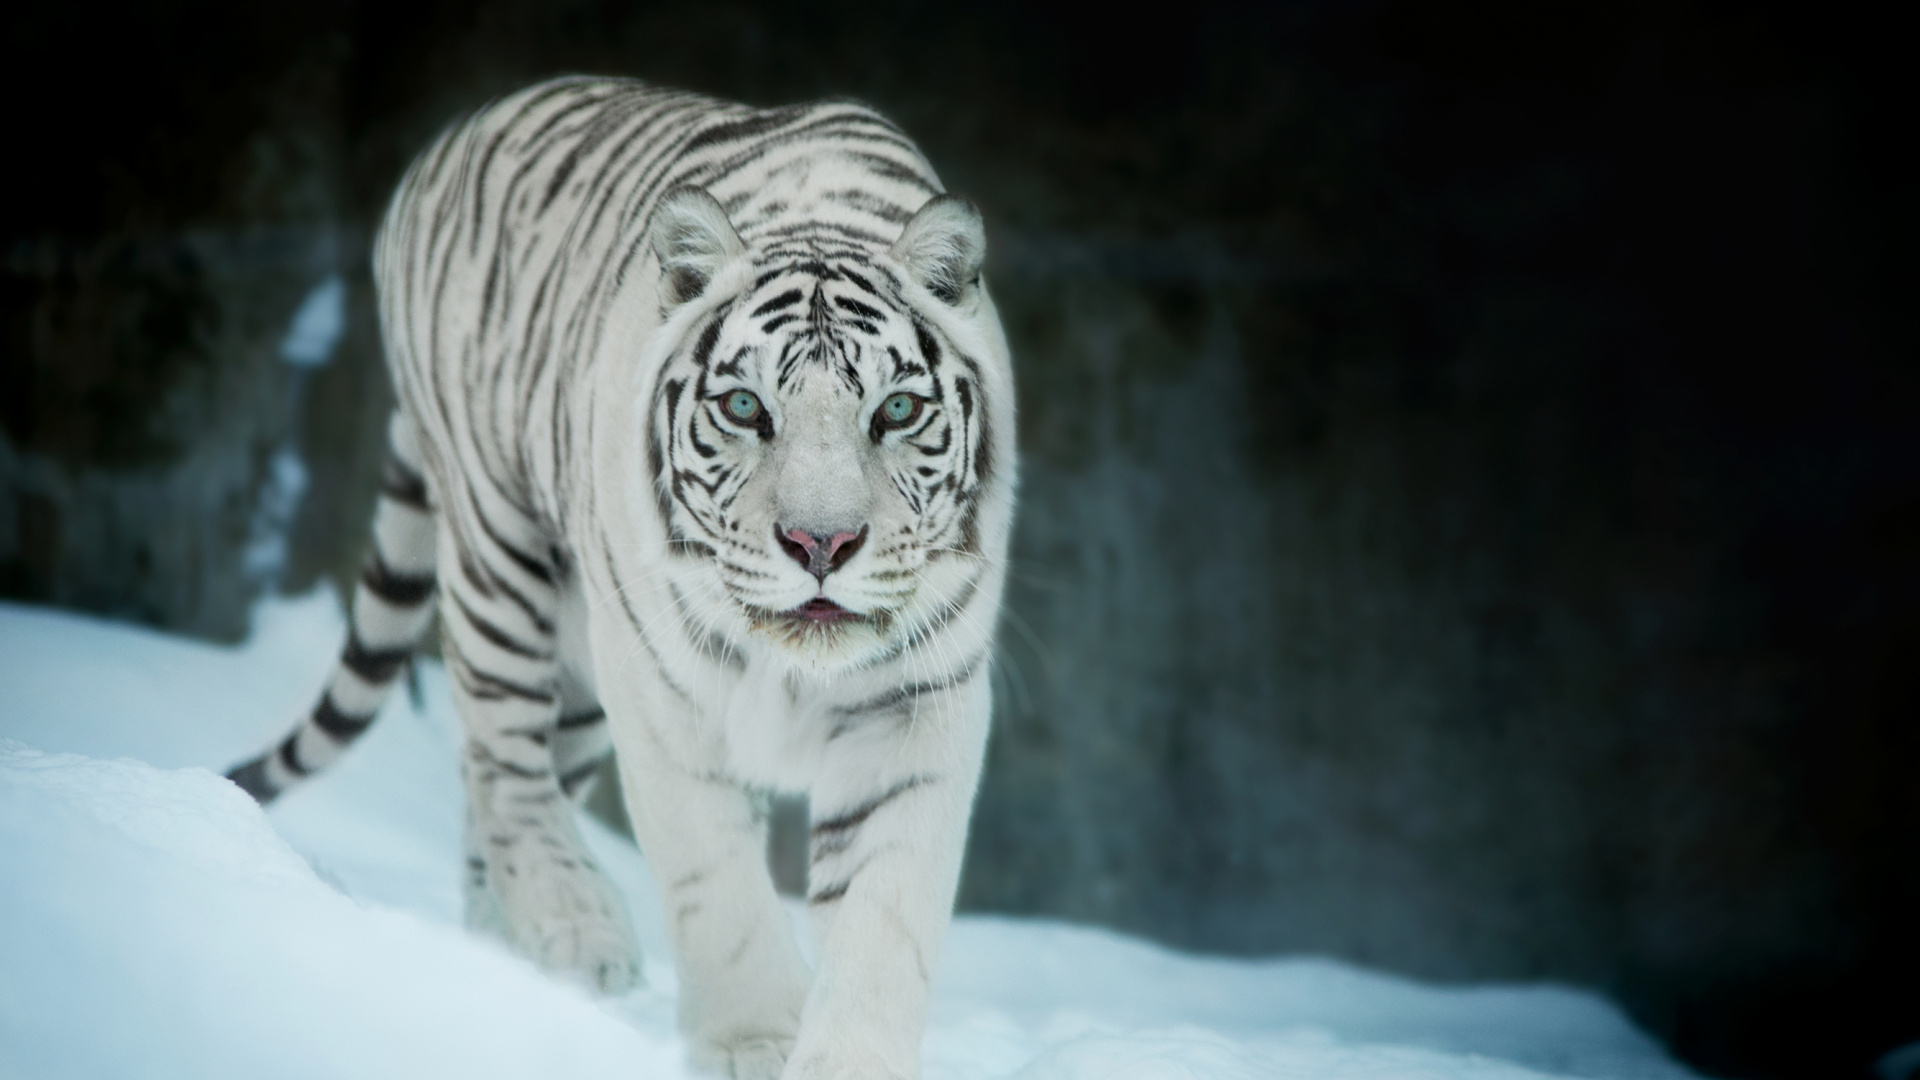 White and Black Tiger on White Snow. Wallpaper in 1920x1080 Resolution